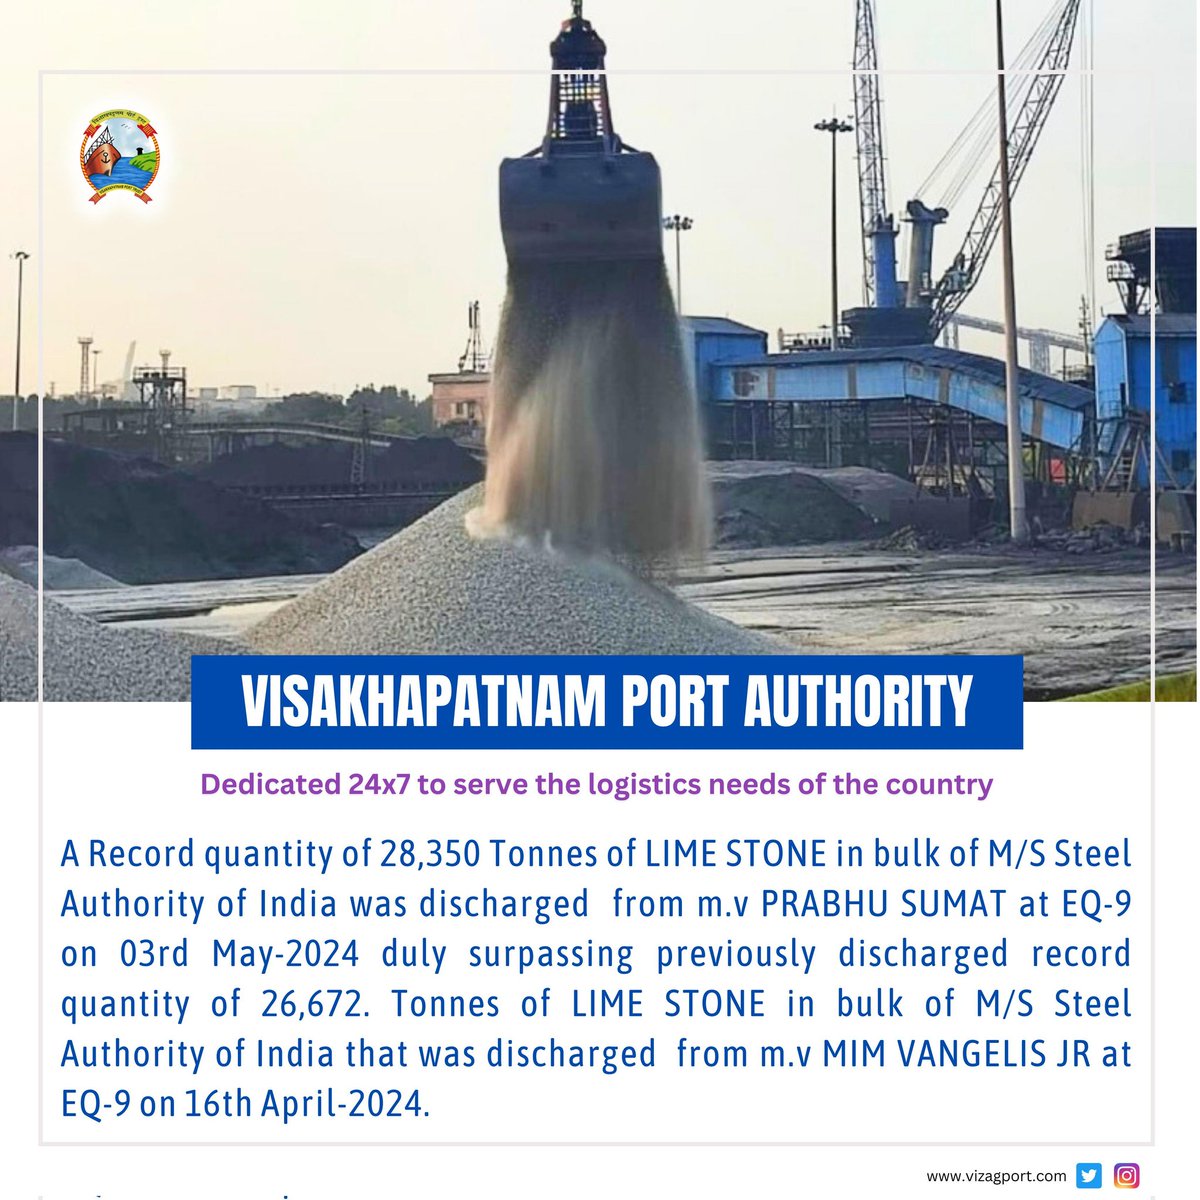 A #Record quantity of 28,350 Tonnes of #LimeStone in bulk of @SAILsteel was discharged  from m.v PRABHU SUMAT at EQ-9 on 03.05.2024 duly surpassing previously discharged record quantity of 26,672 Tonnes of Lime Stone in bulk of M/S Steel Authority of India that was discharged